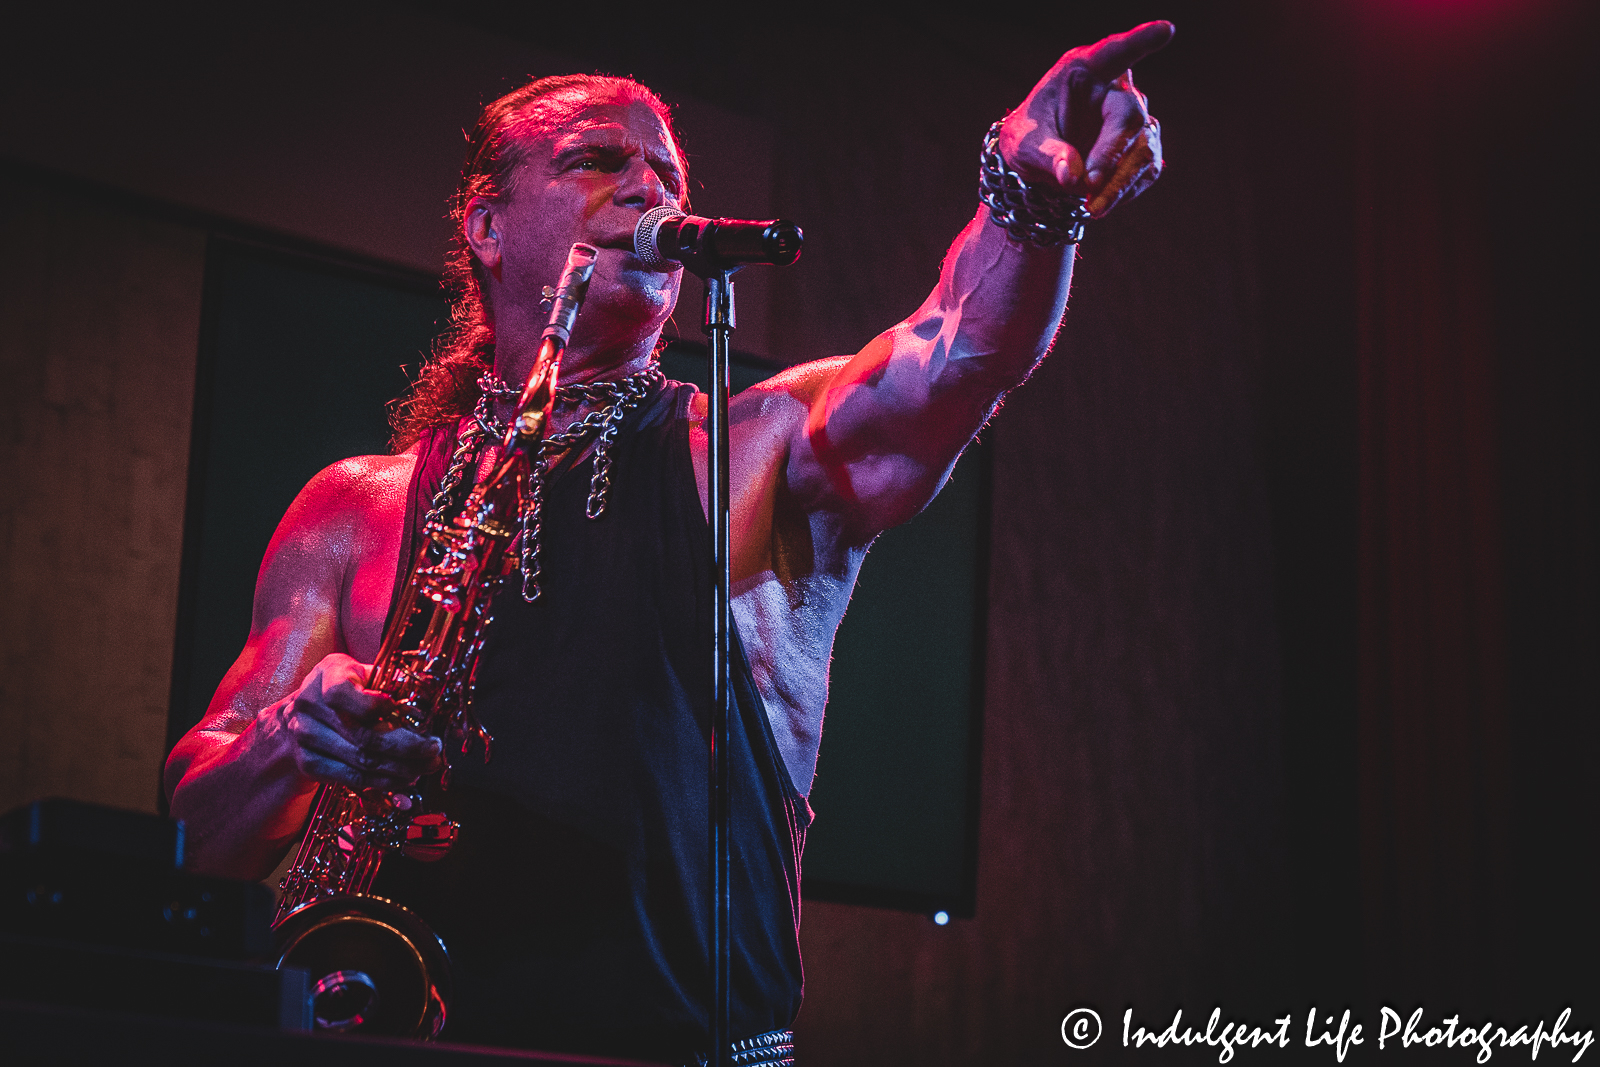 Sax player Tim Cappello performing live in concert at the recordBar in Kansas City, MO on June 15, 2023.